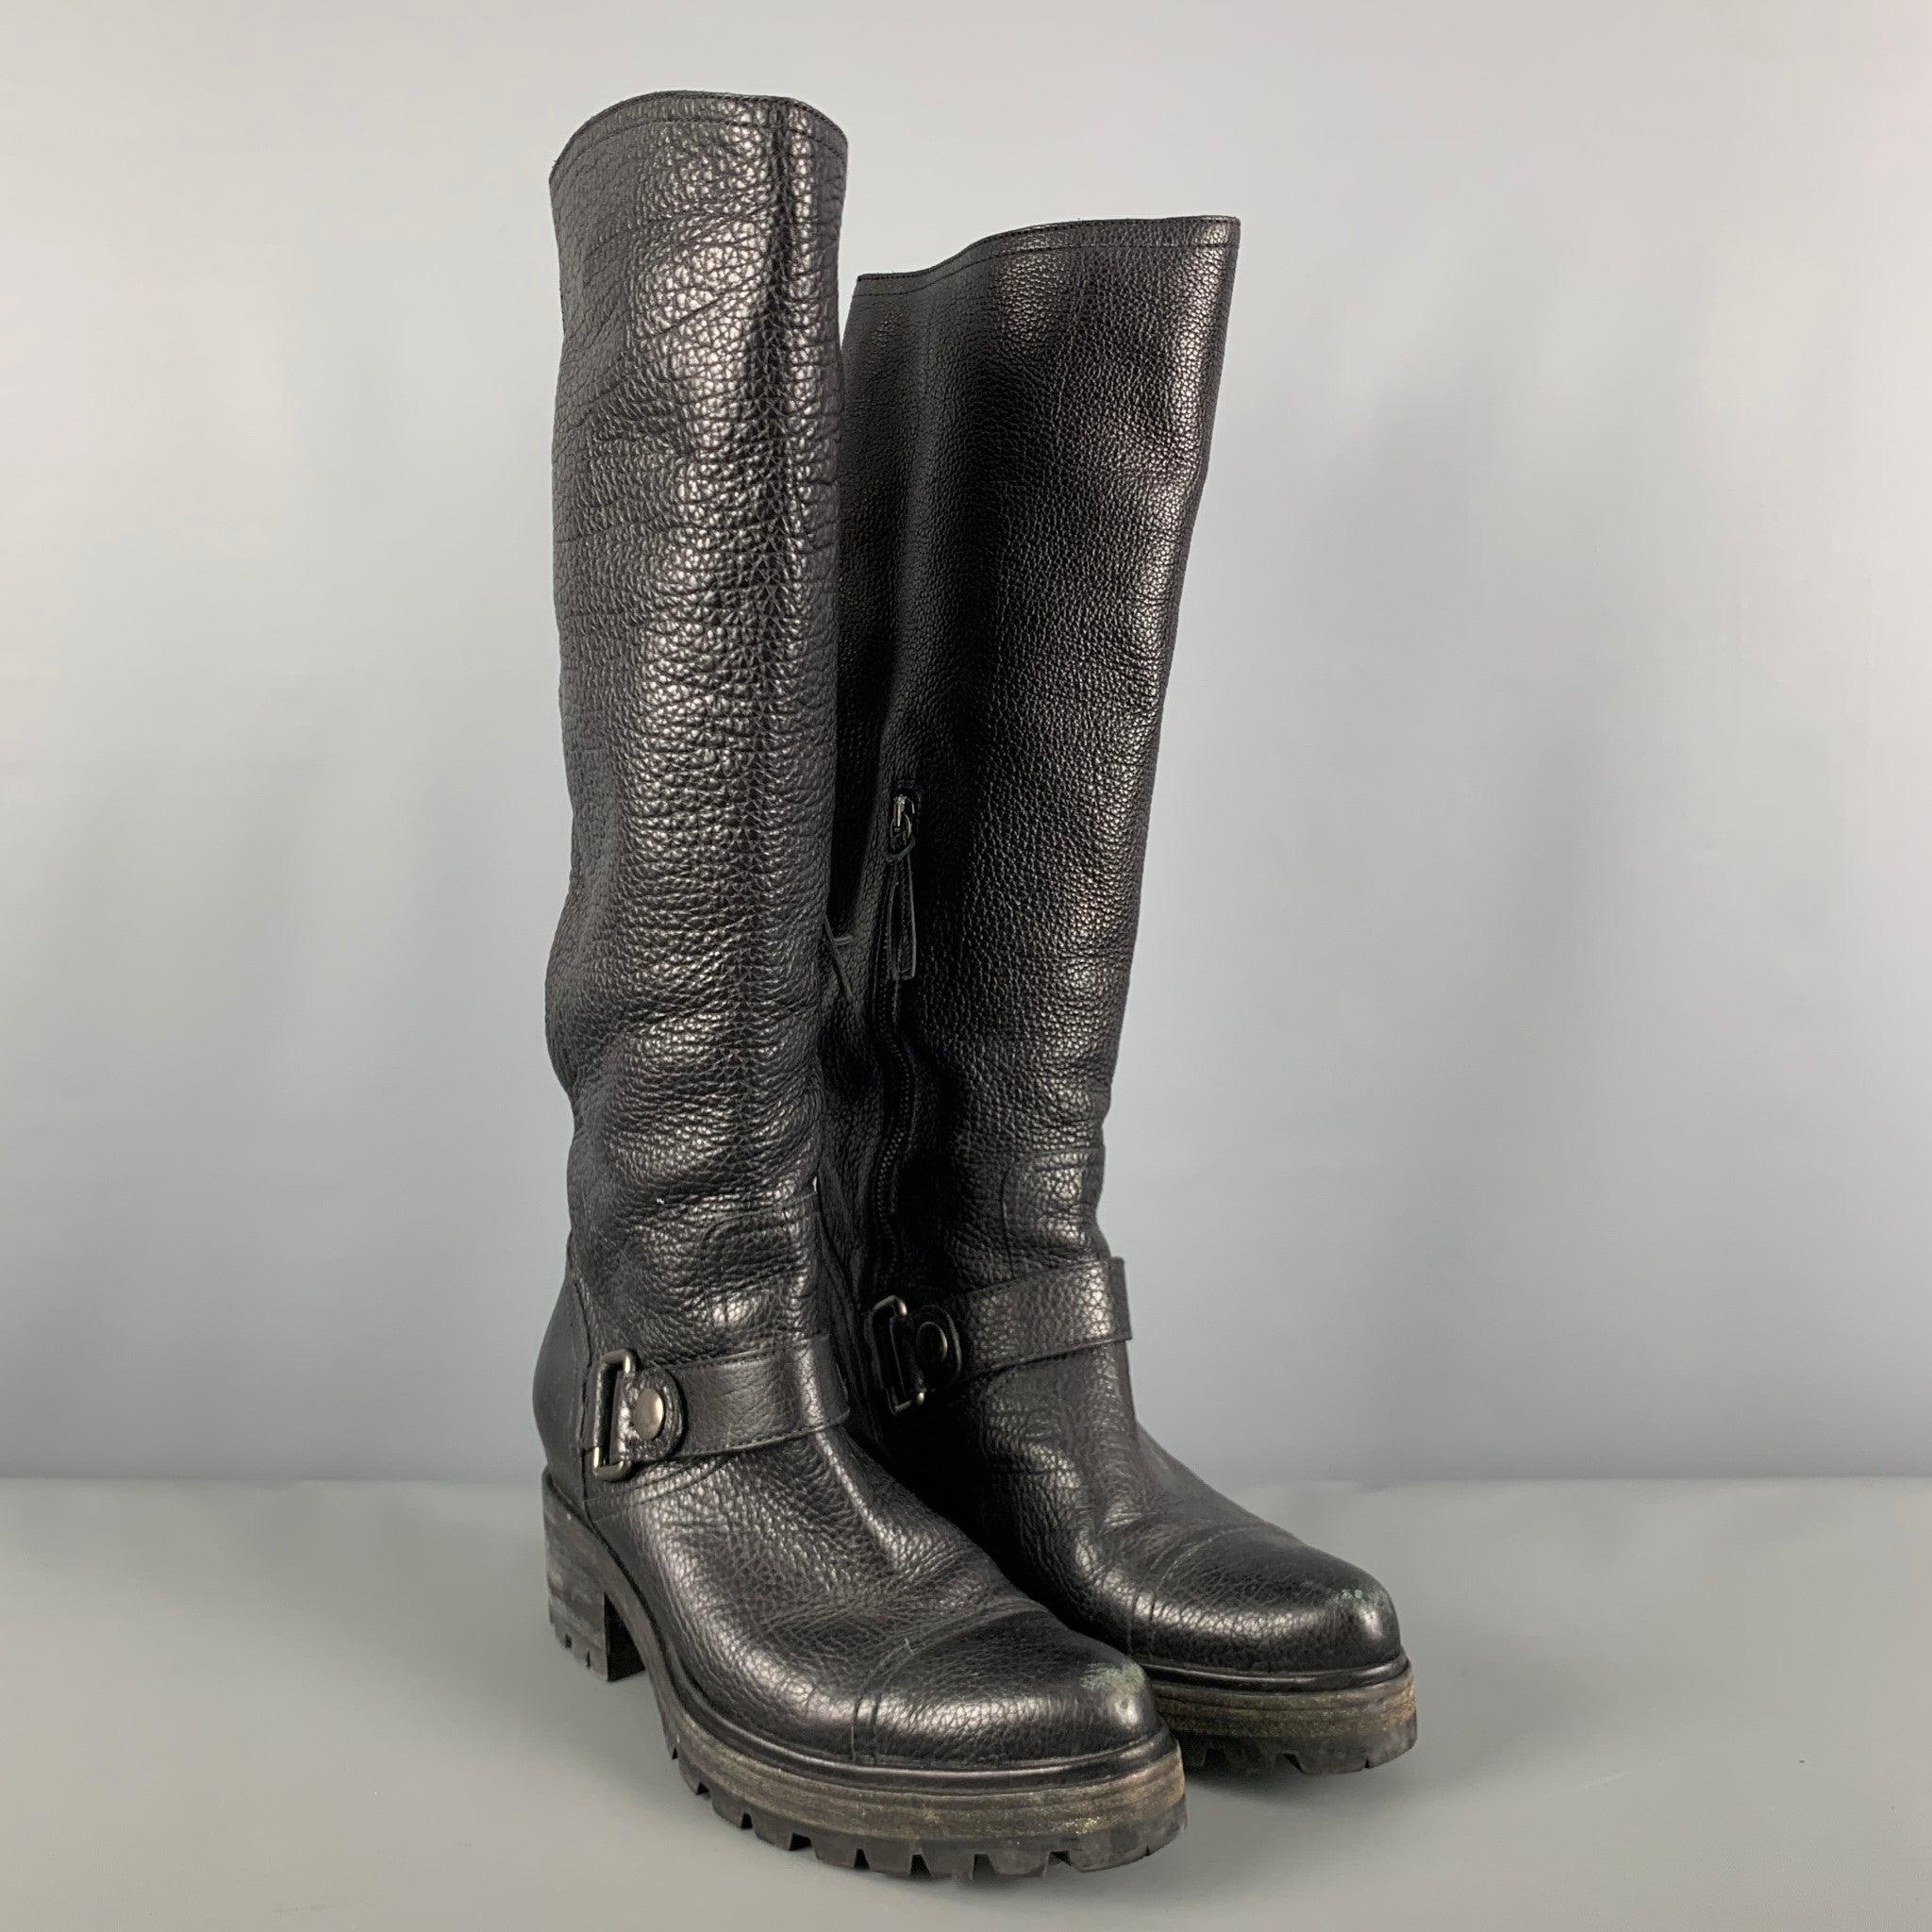 MIU MIU boots comes in a black pebble grain leather featuring a mid-calf length, buckle belted details, chunky rubber sole, and a zip up closure. Made in Italy.Excellent Pre-Owned Condition. 

Marked:   39 

Measurements: 
  Length: 11 inches Width: